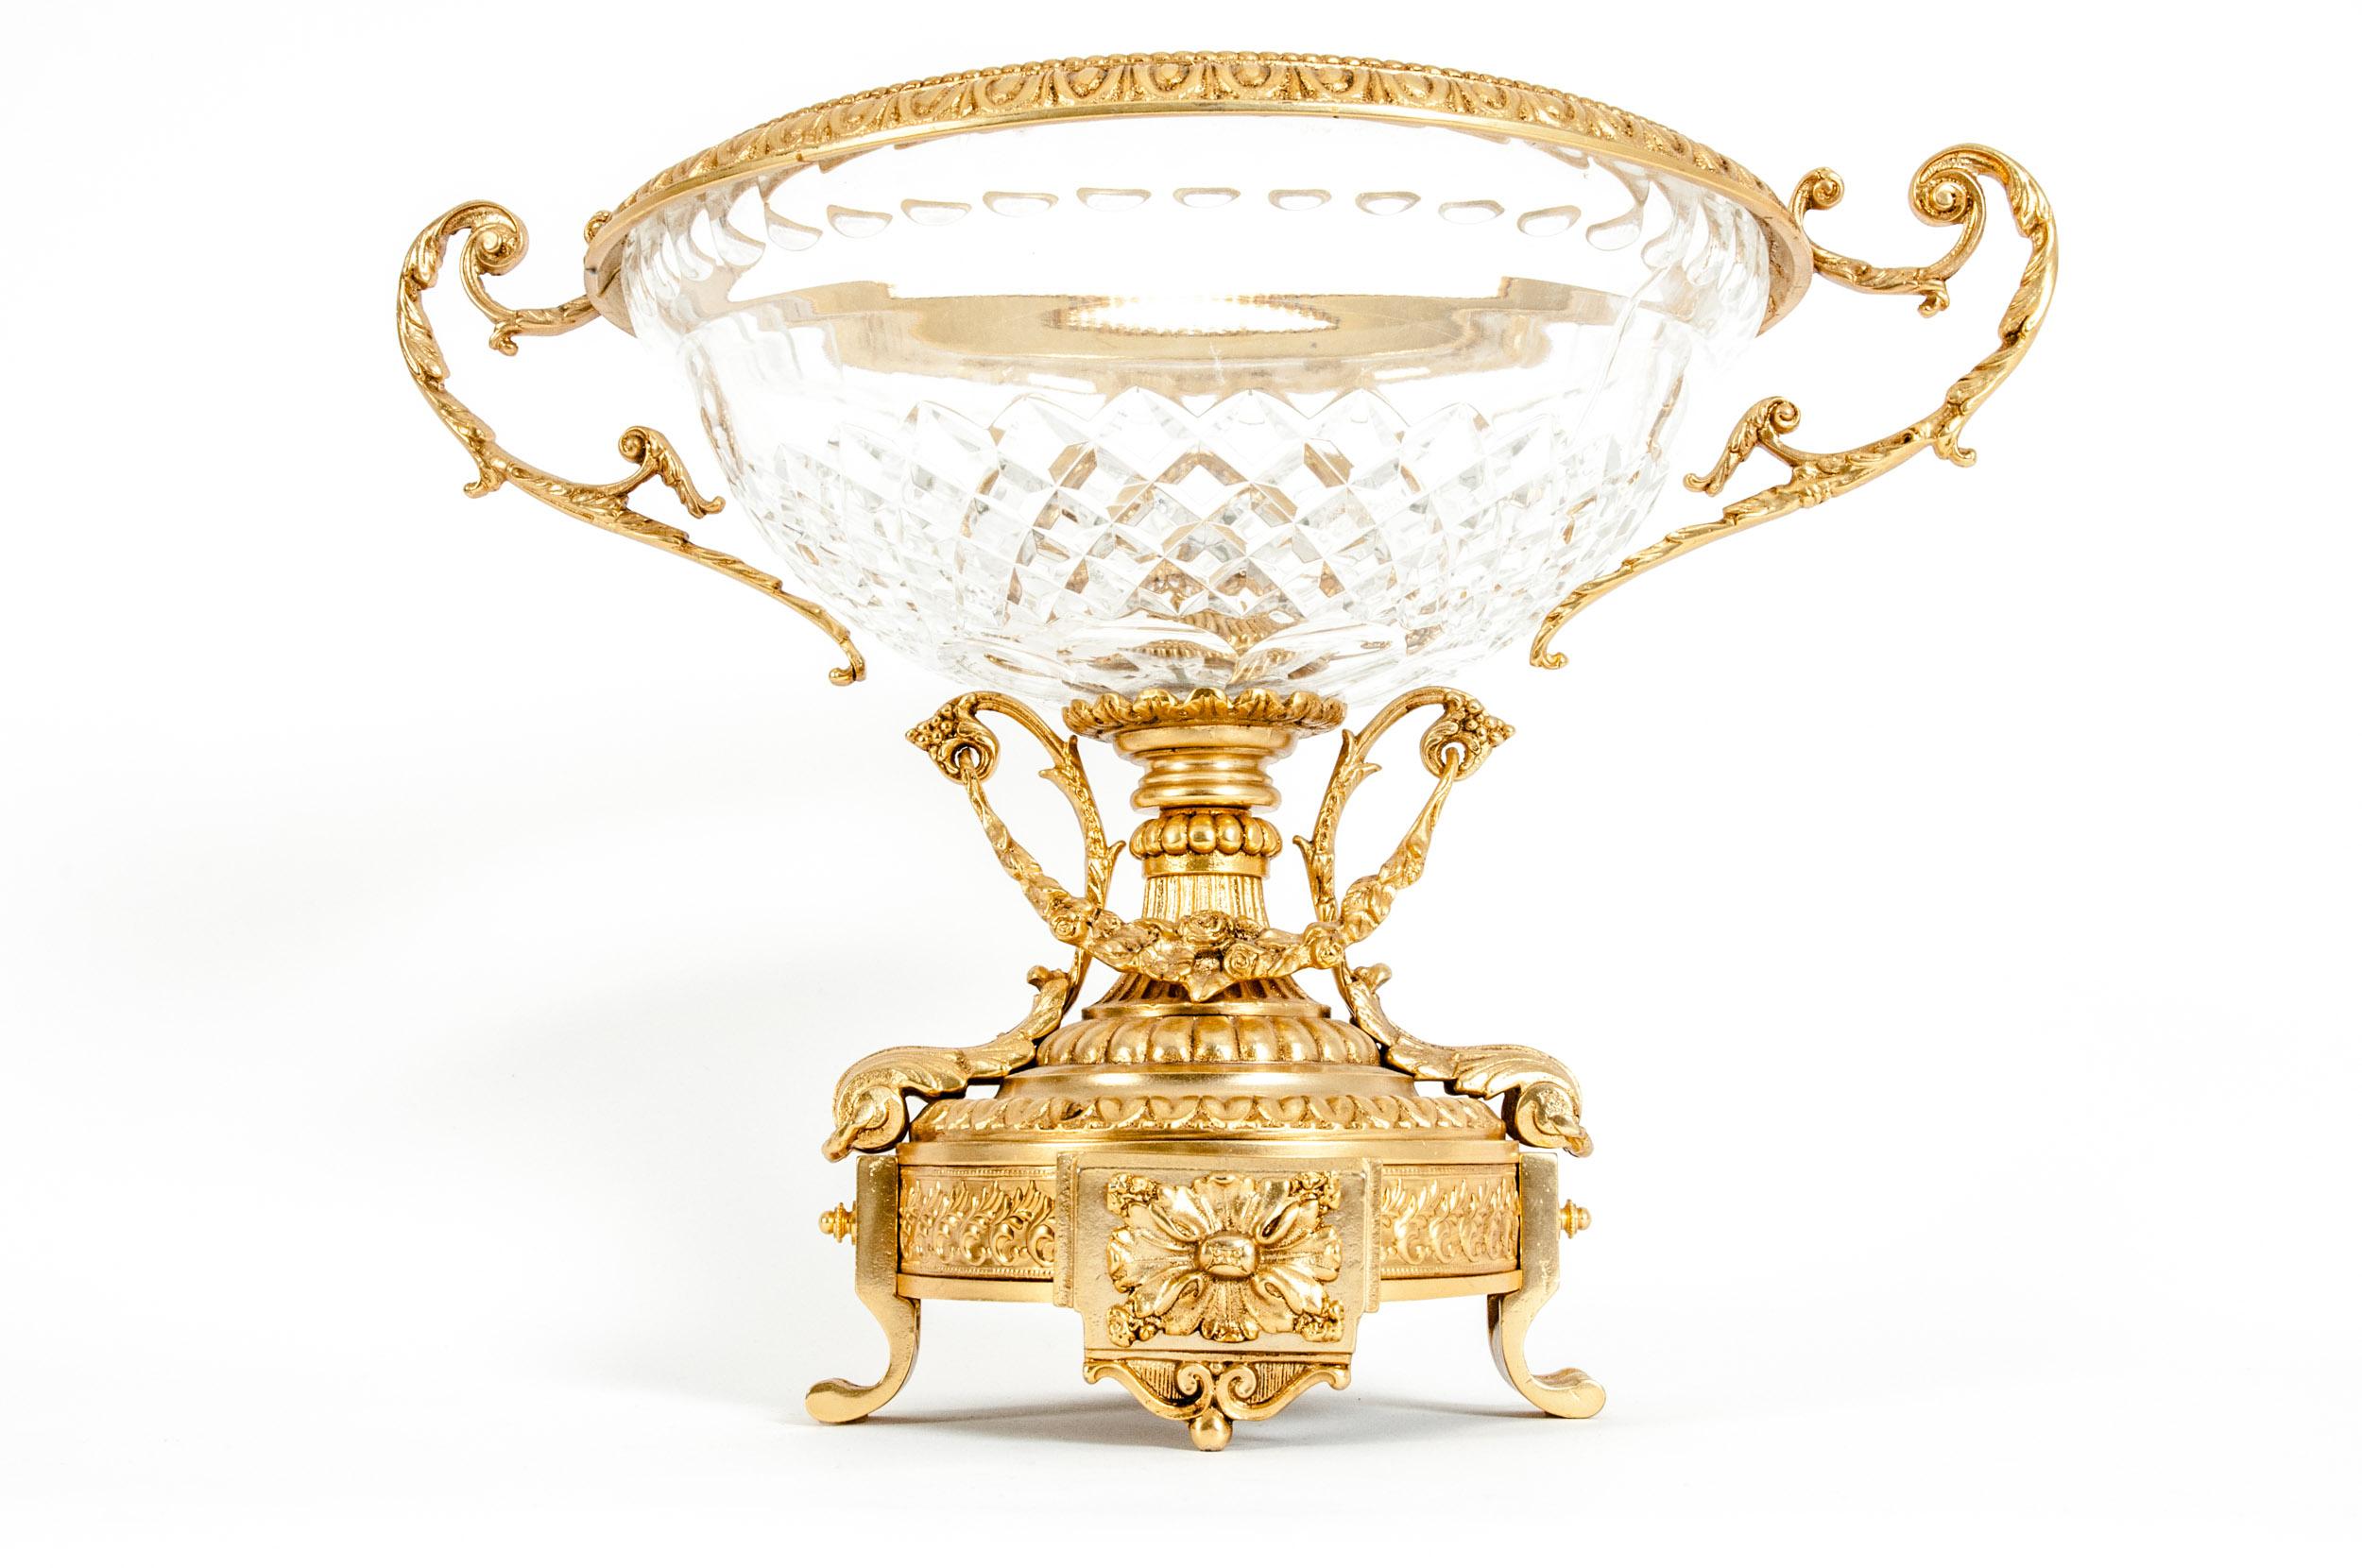 Footed gilt bronze mounted handcut crystal centerpiece with side handles and exterior design details. The footed gilt bronze pedestal base supported by a diamond cut pattern crystal bowl flanked by scroll handles. The centerpiece is in great